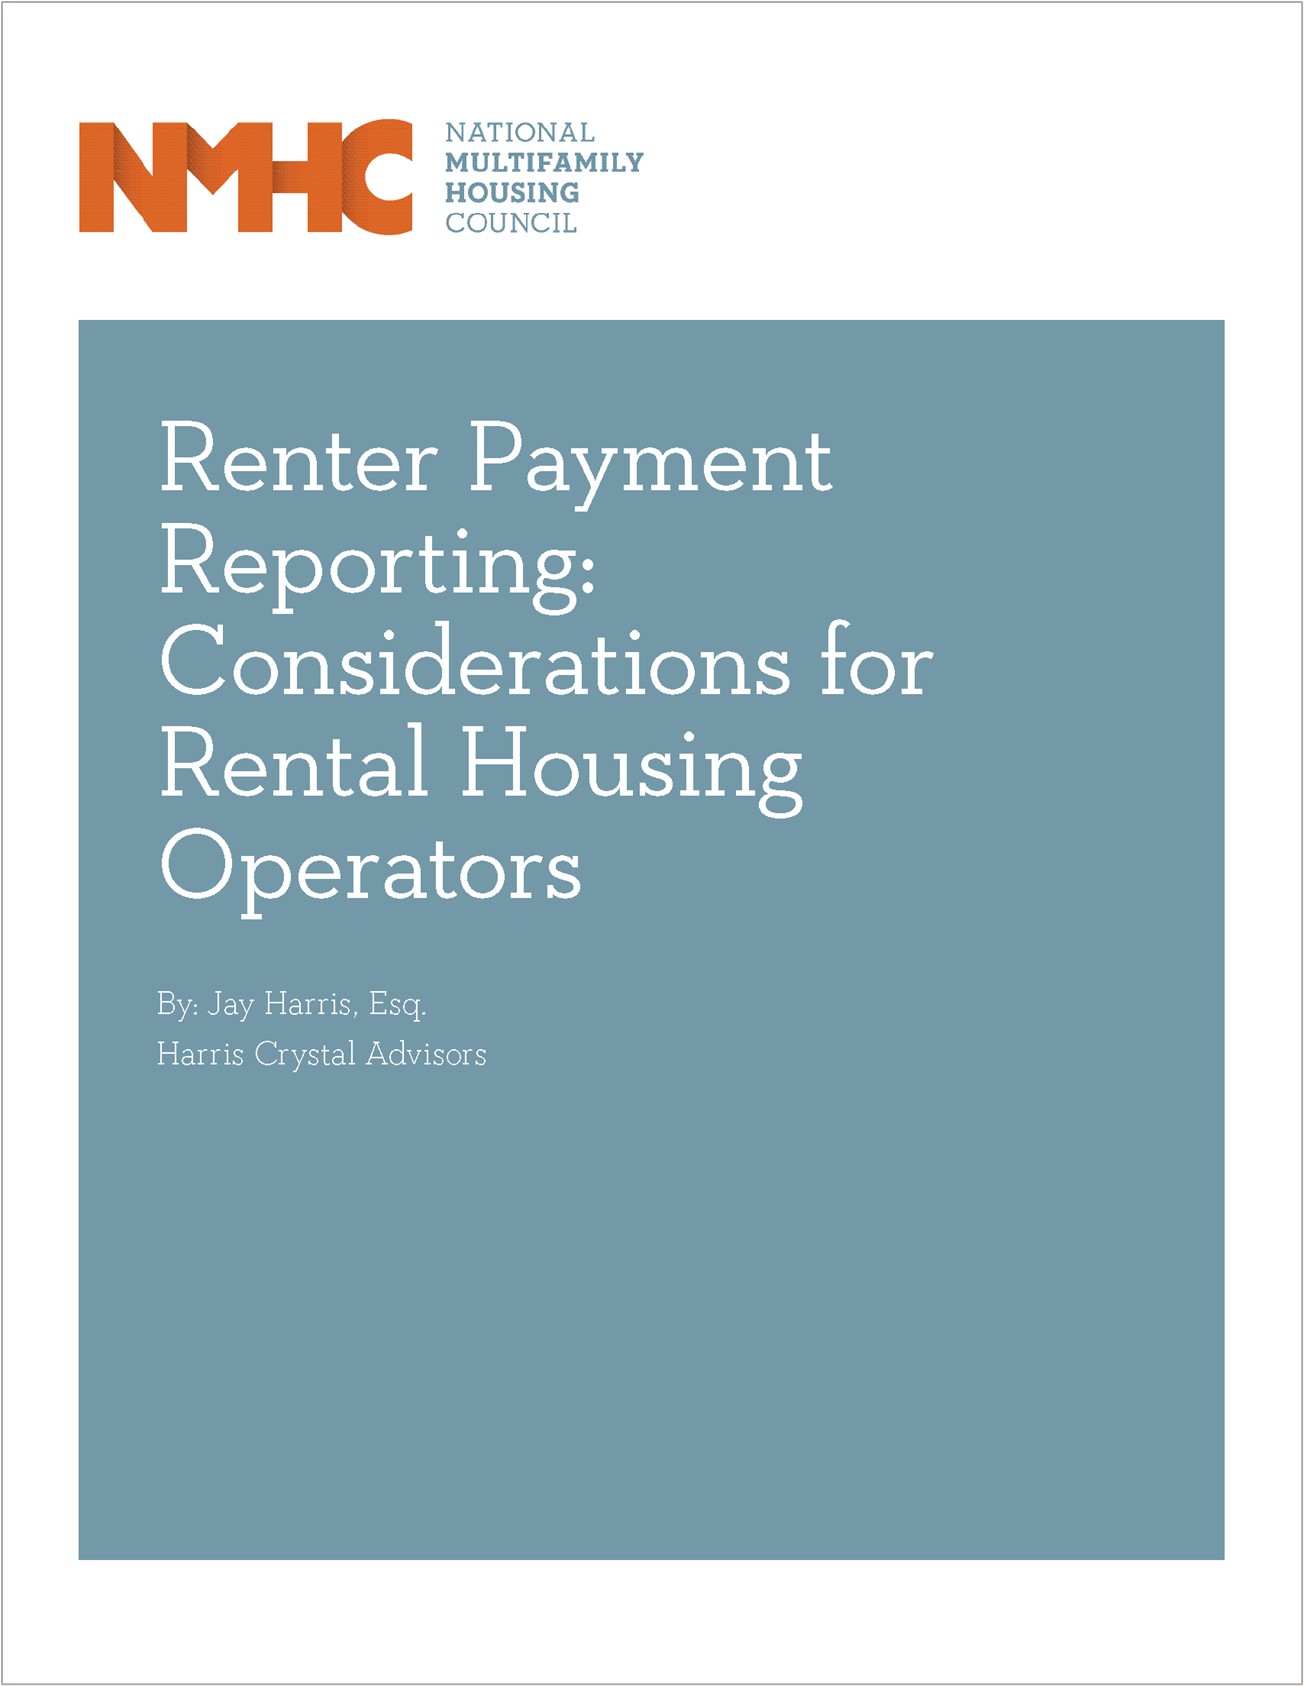 NMHC White Paper - Renter Payment Reporting: Considerations for Rental Housing Operators